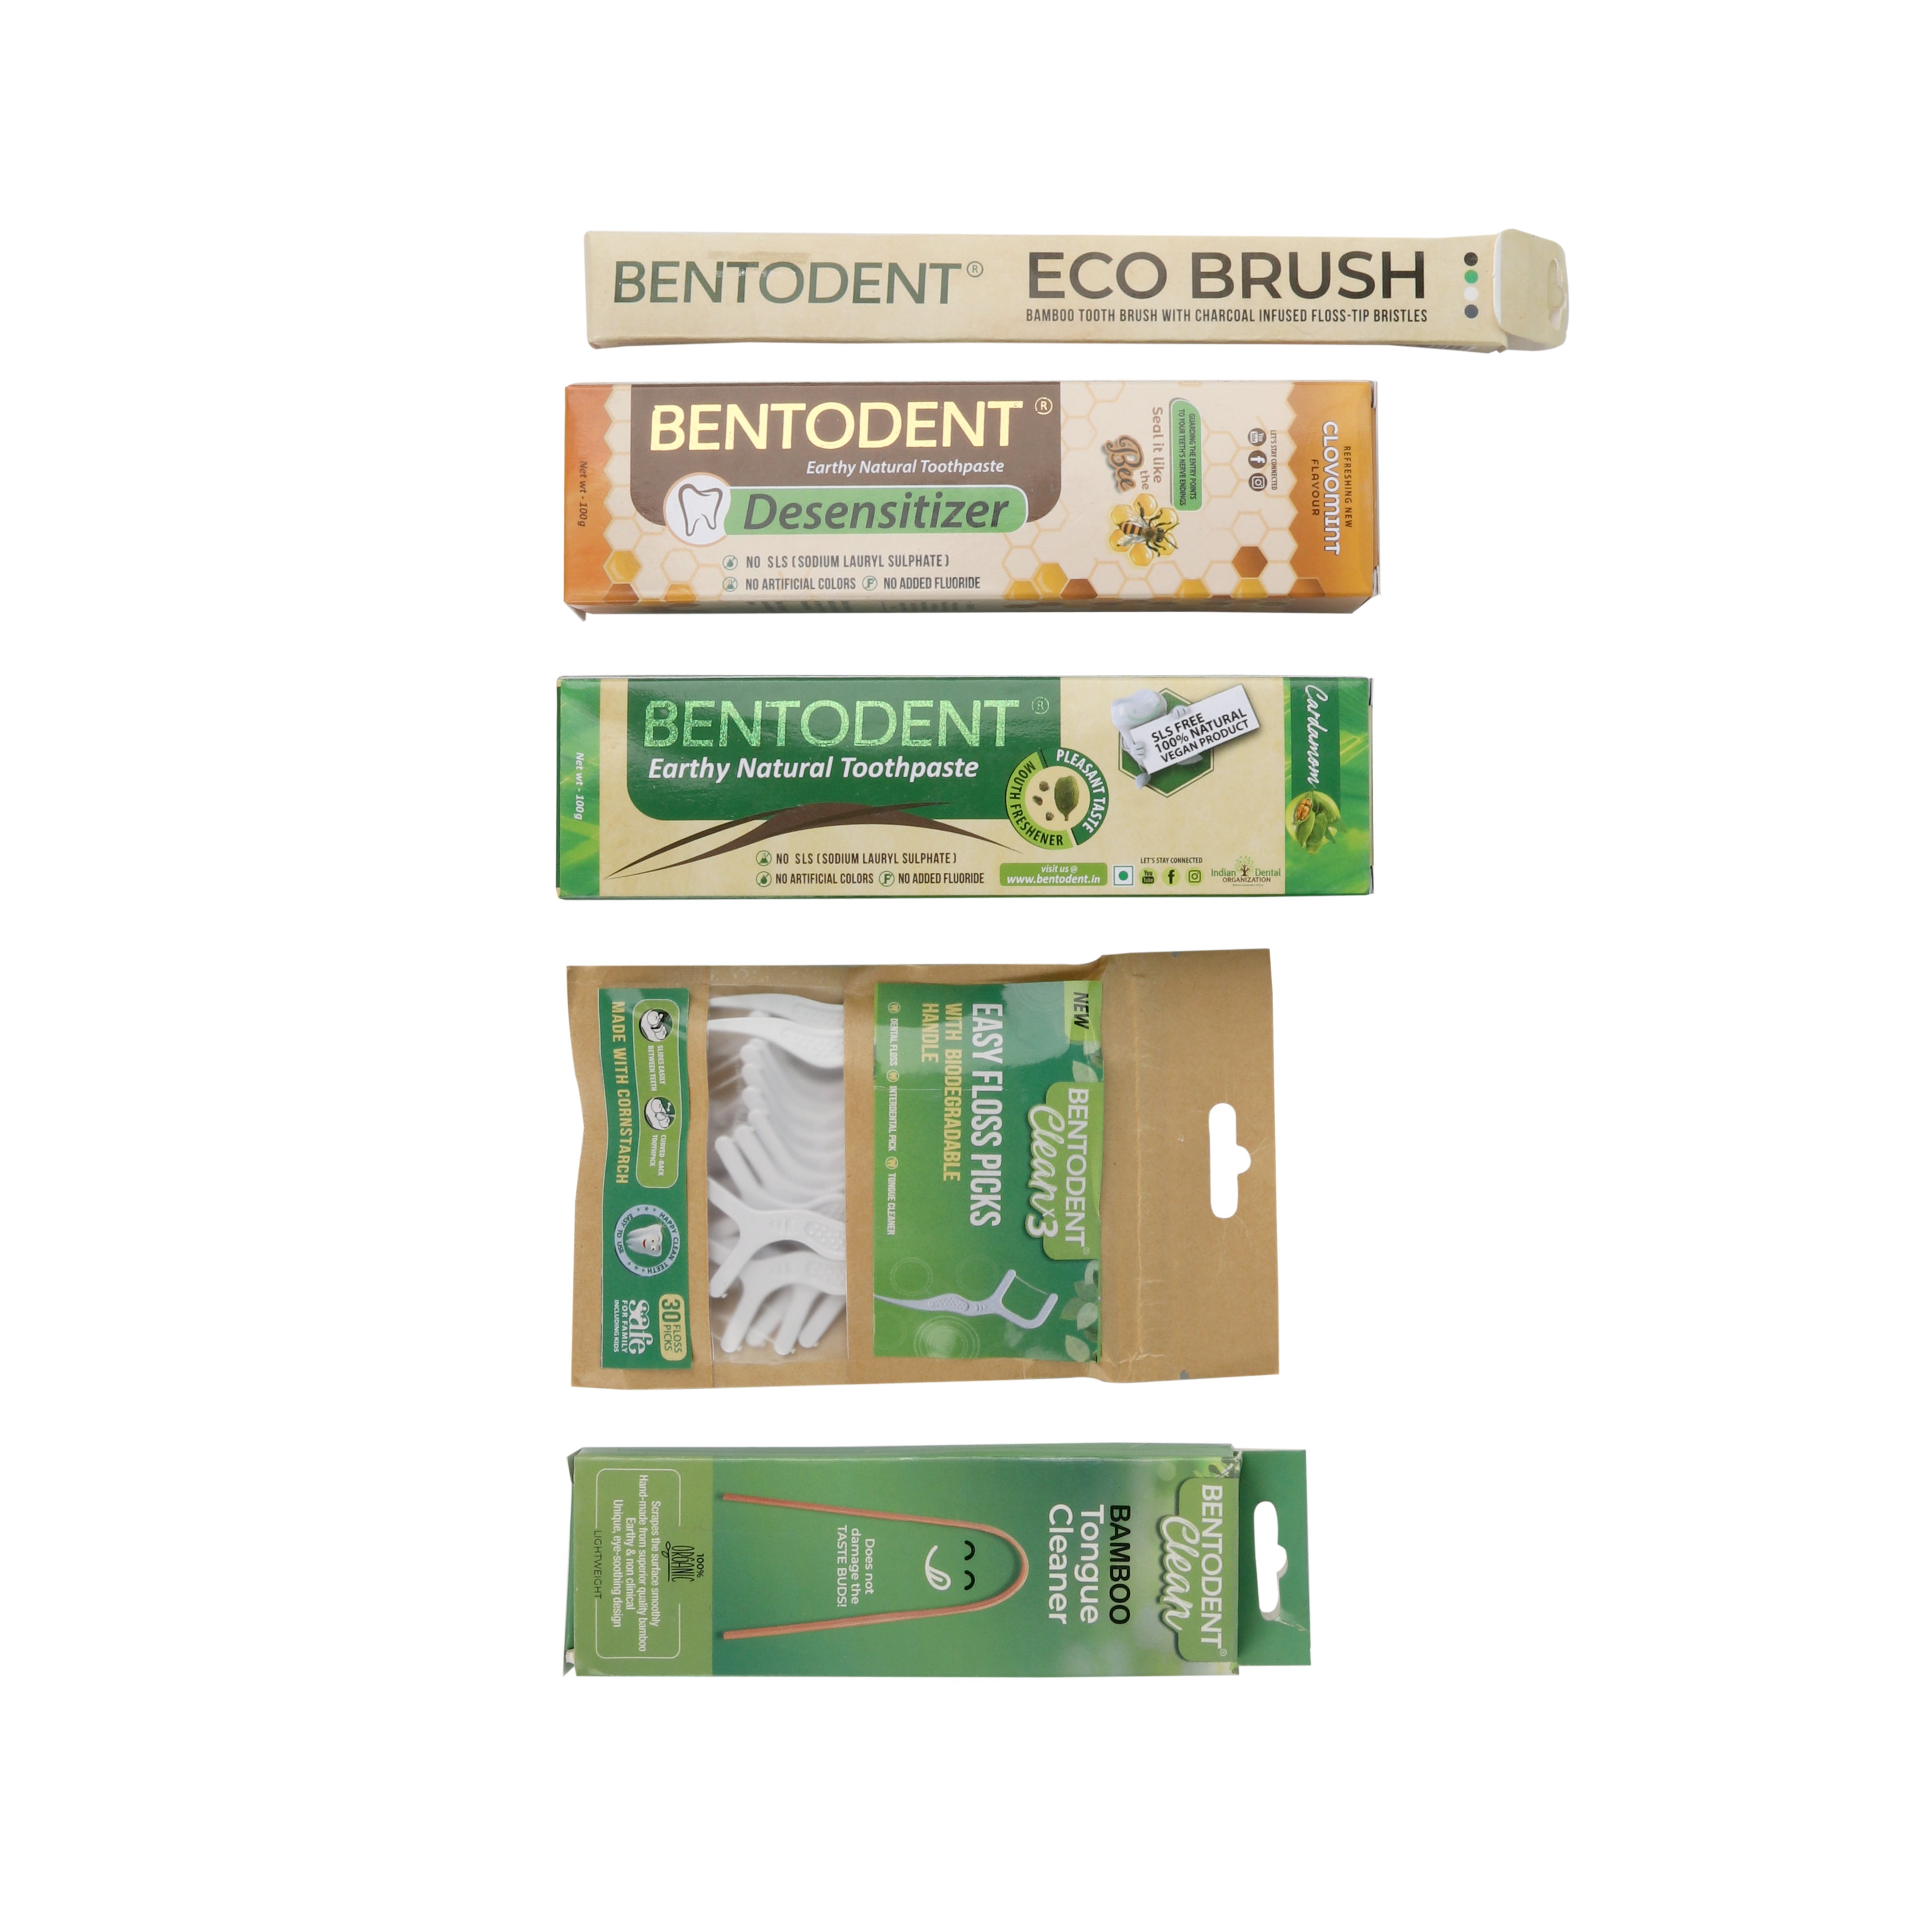 Bentodent Smile Box - Gift Box for all Ocassions - Indian Dental Organization